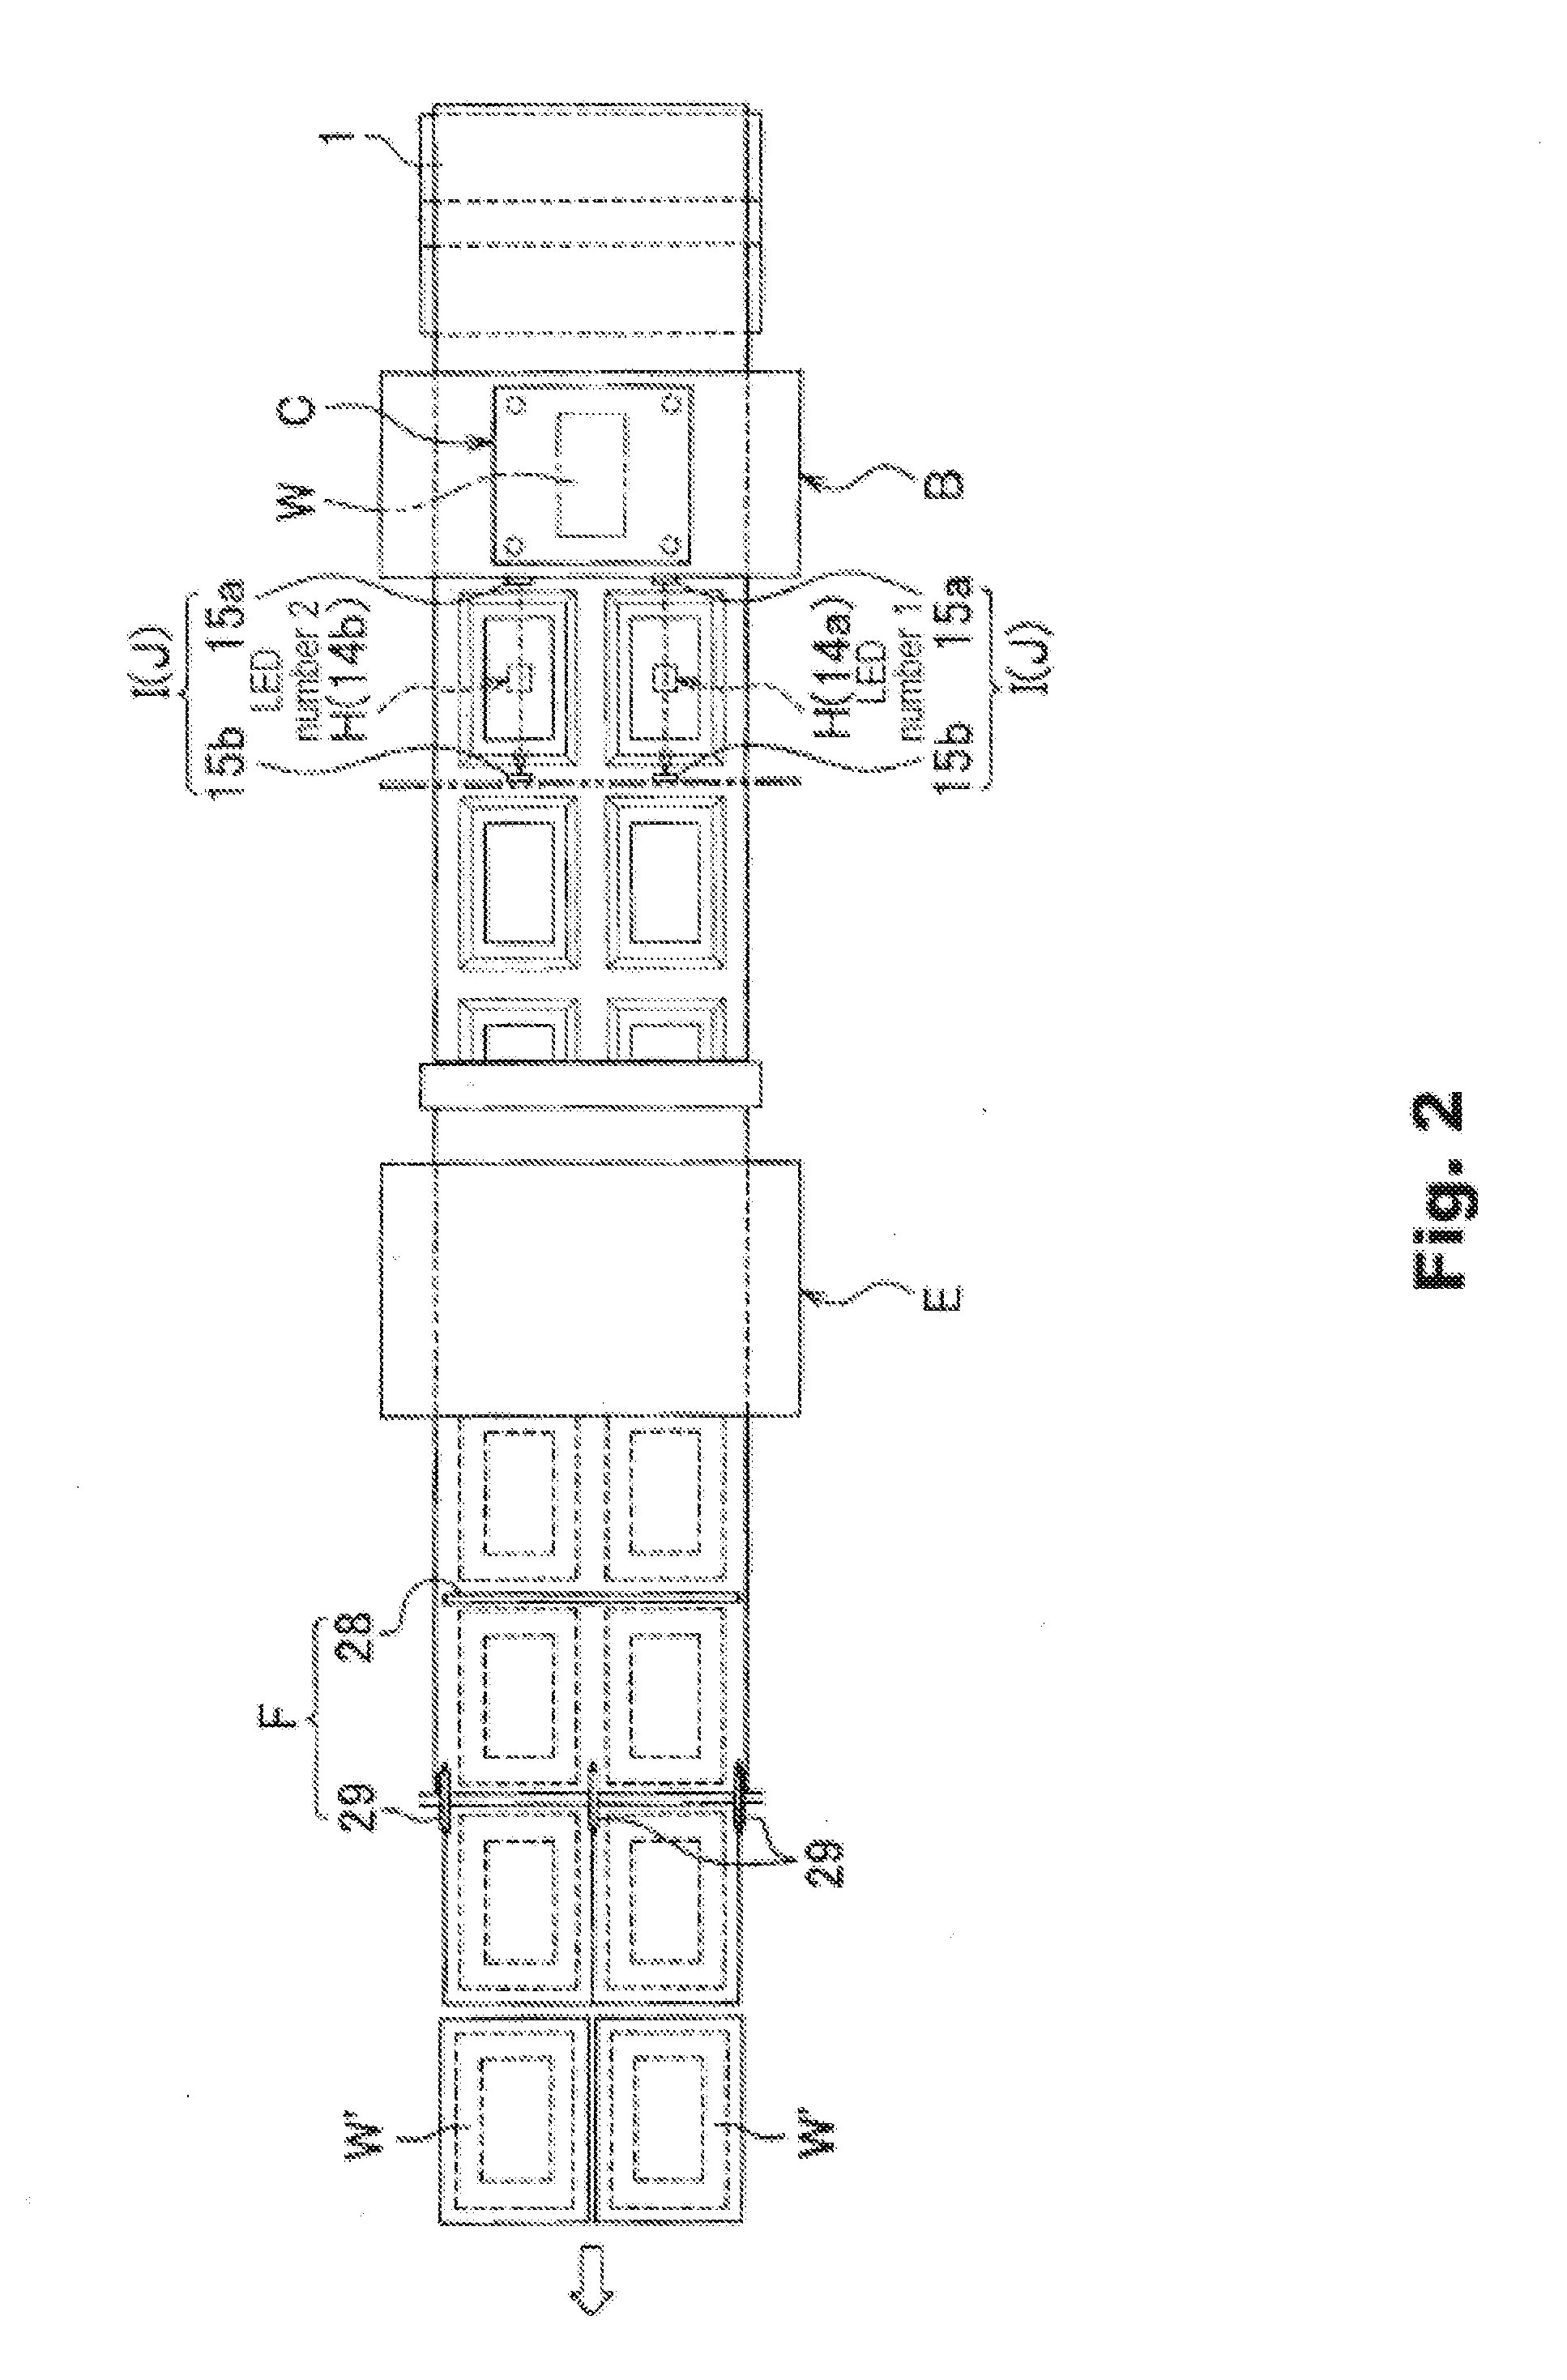 Thermal sealing packaging systems and methods for thermal sealing packaging